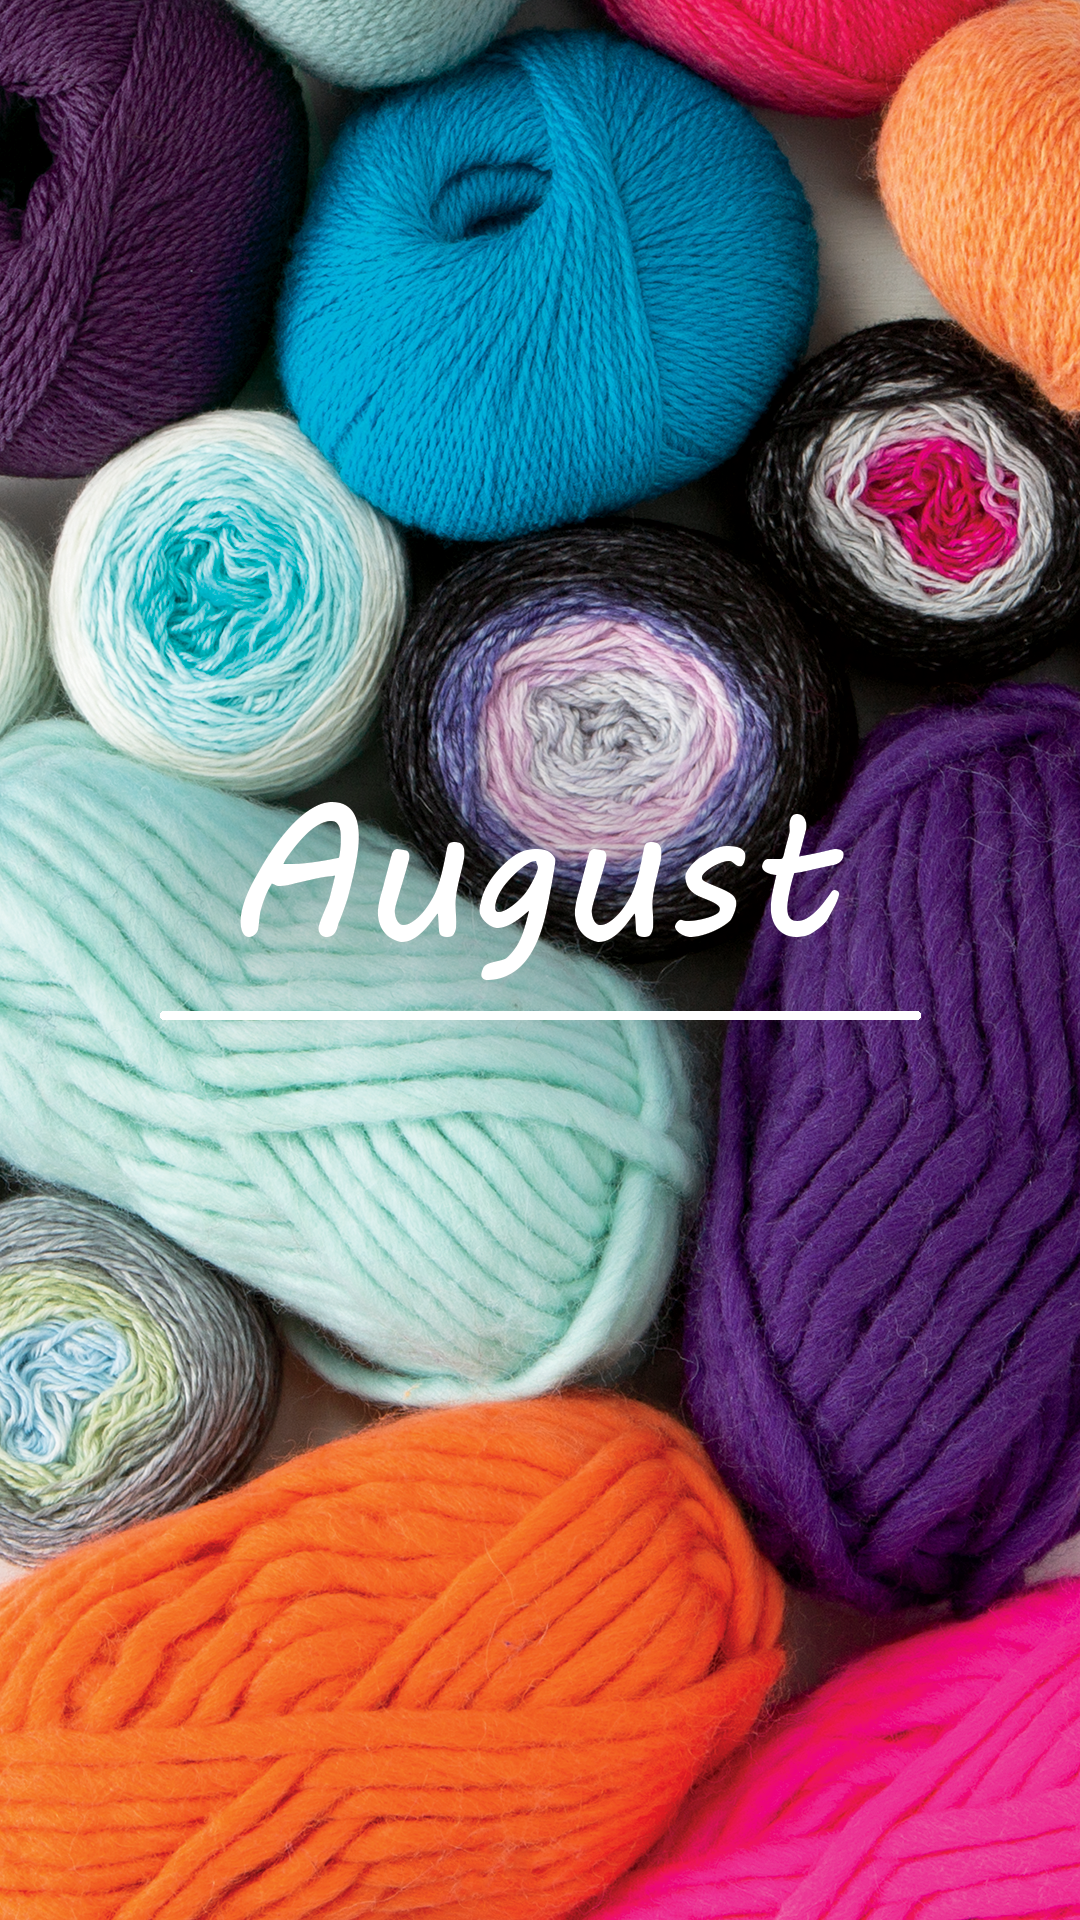 A pile of various colorful yarn with the text "August"